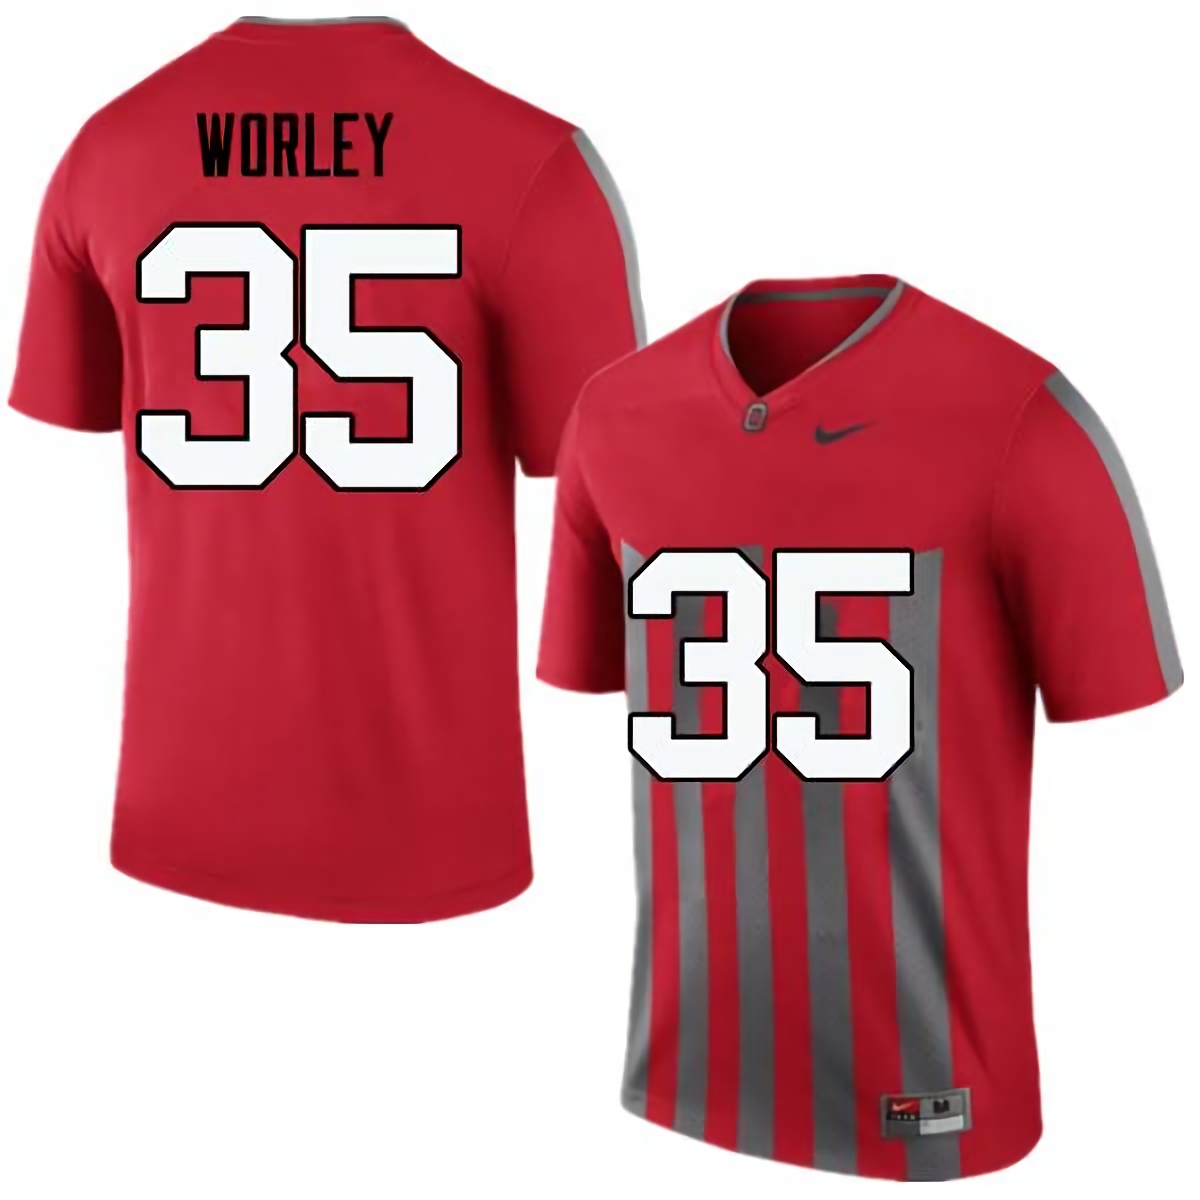 Chris Worley Ohio State Buckeyes Men's NCAA #35 Nike Throwback Red College Stitched Football Jersey KIZ5356RC